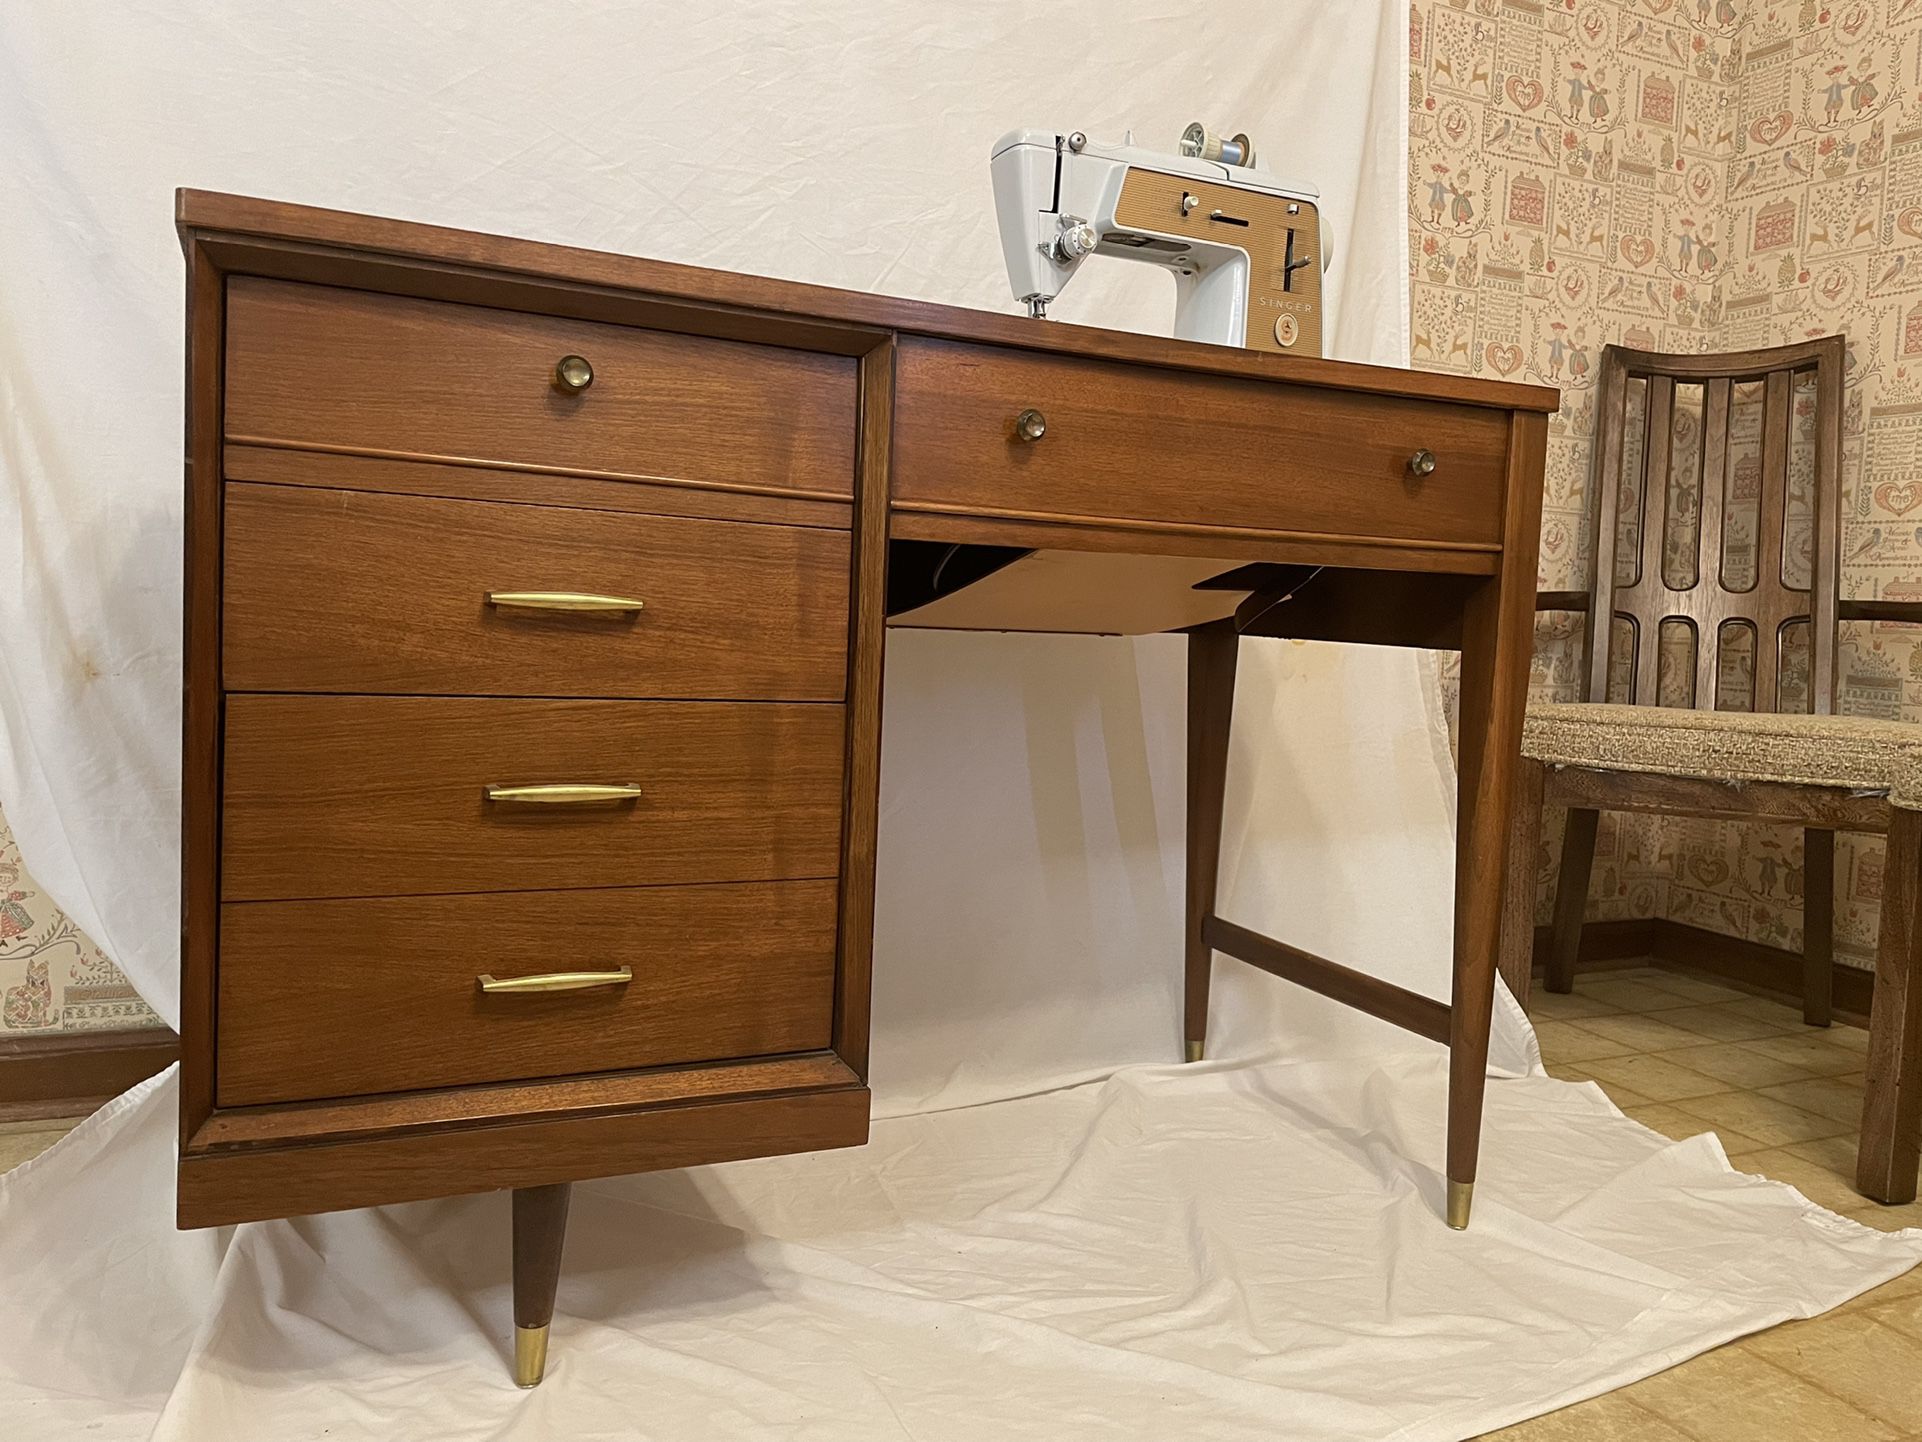 Vintage Mid Century Modern Desk Or Entryway Console Table. Originally A Singer Sewing Machine. Works Perfectly! 